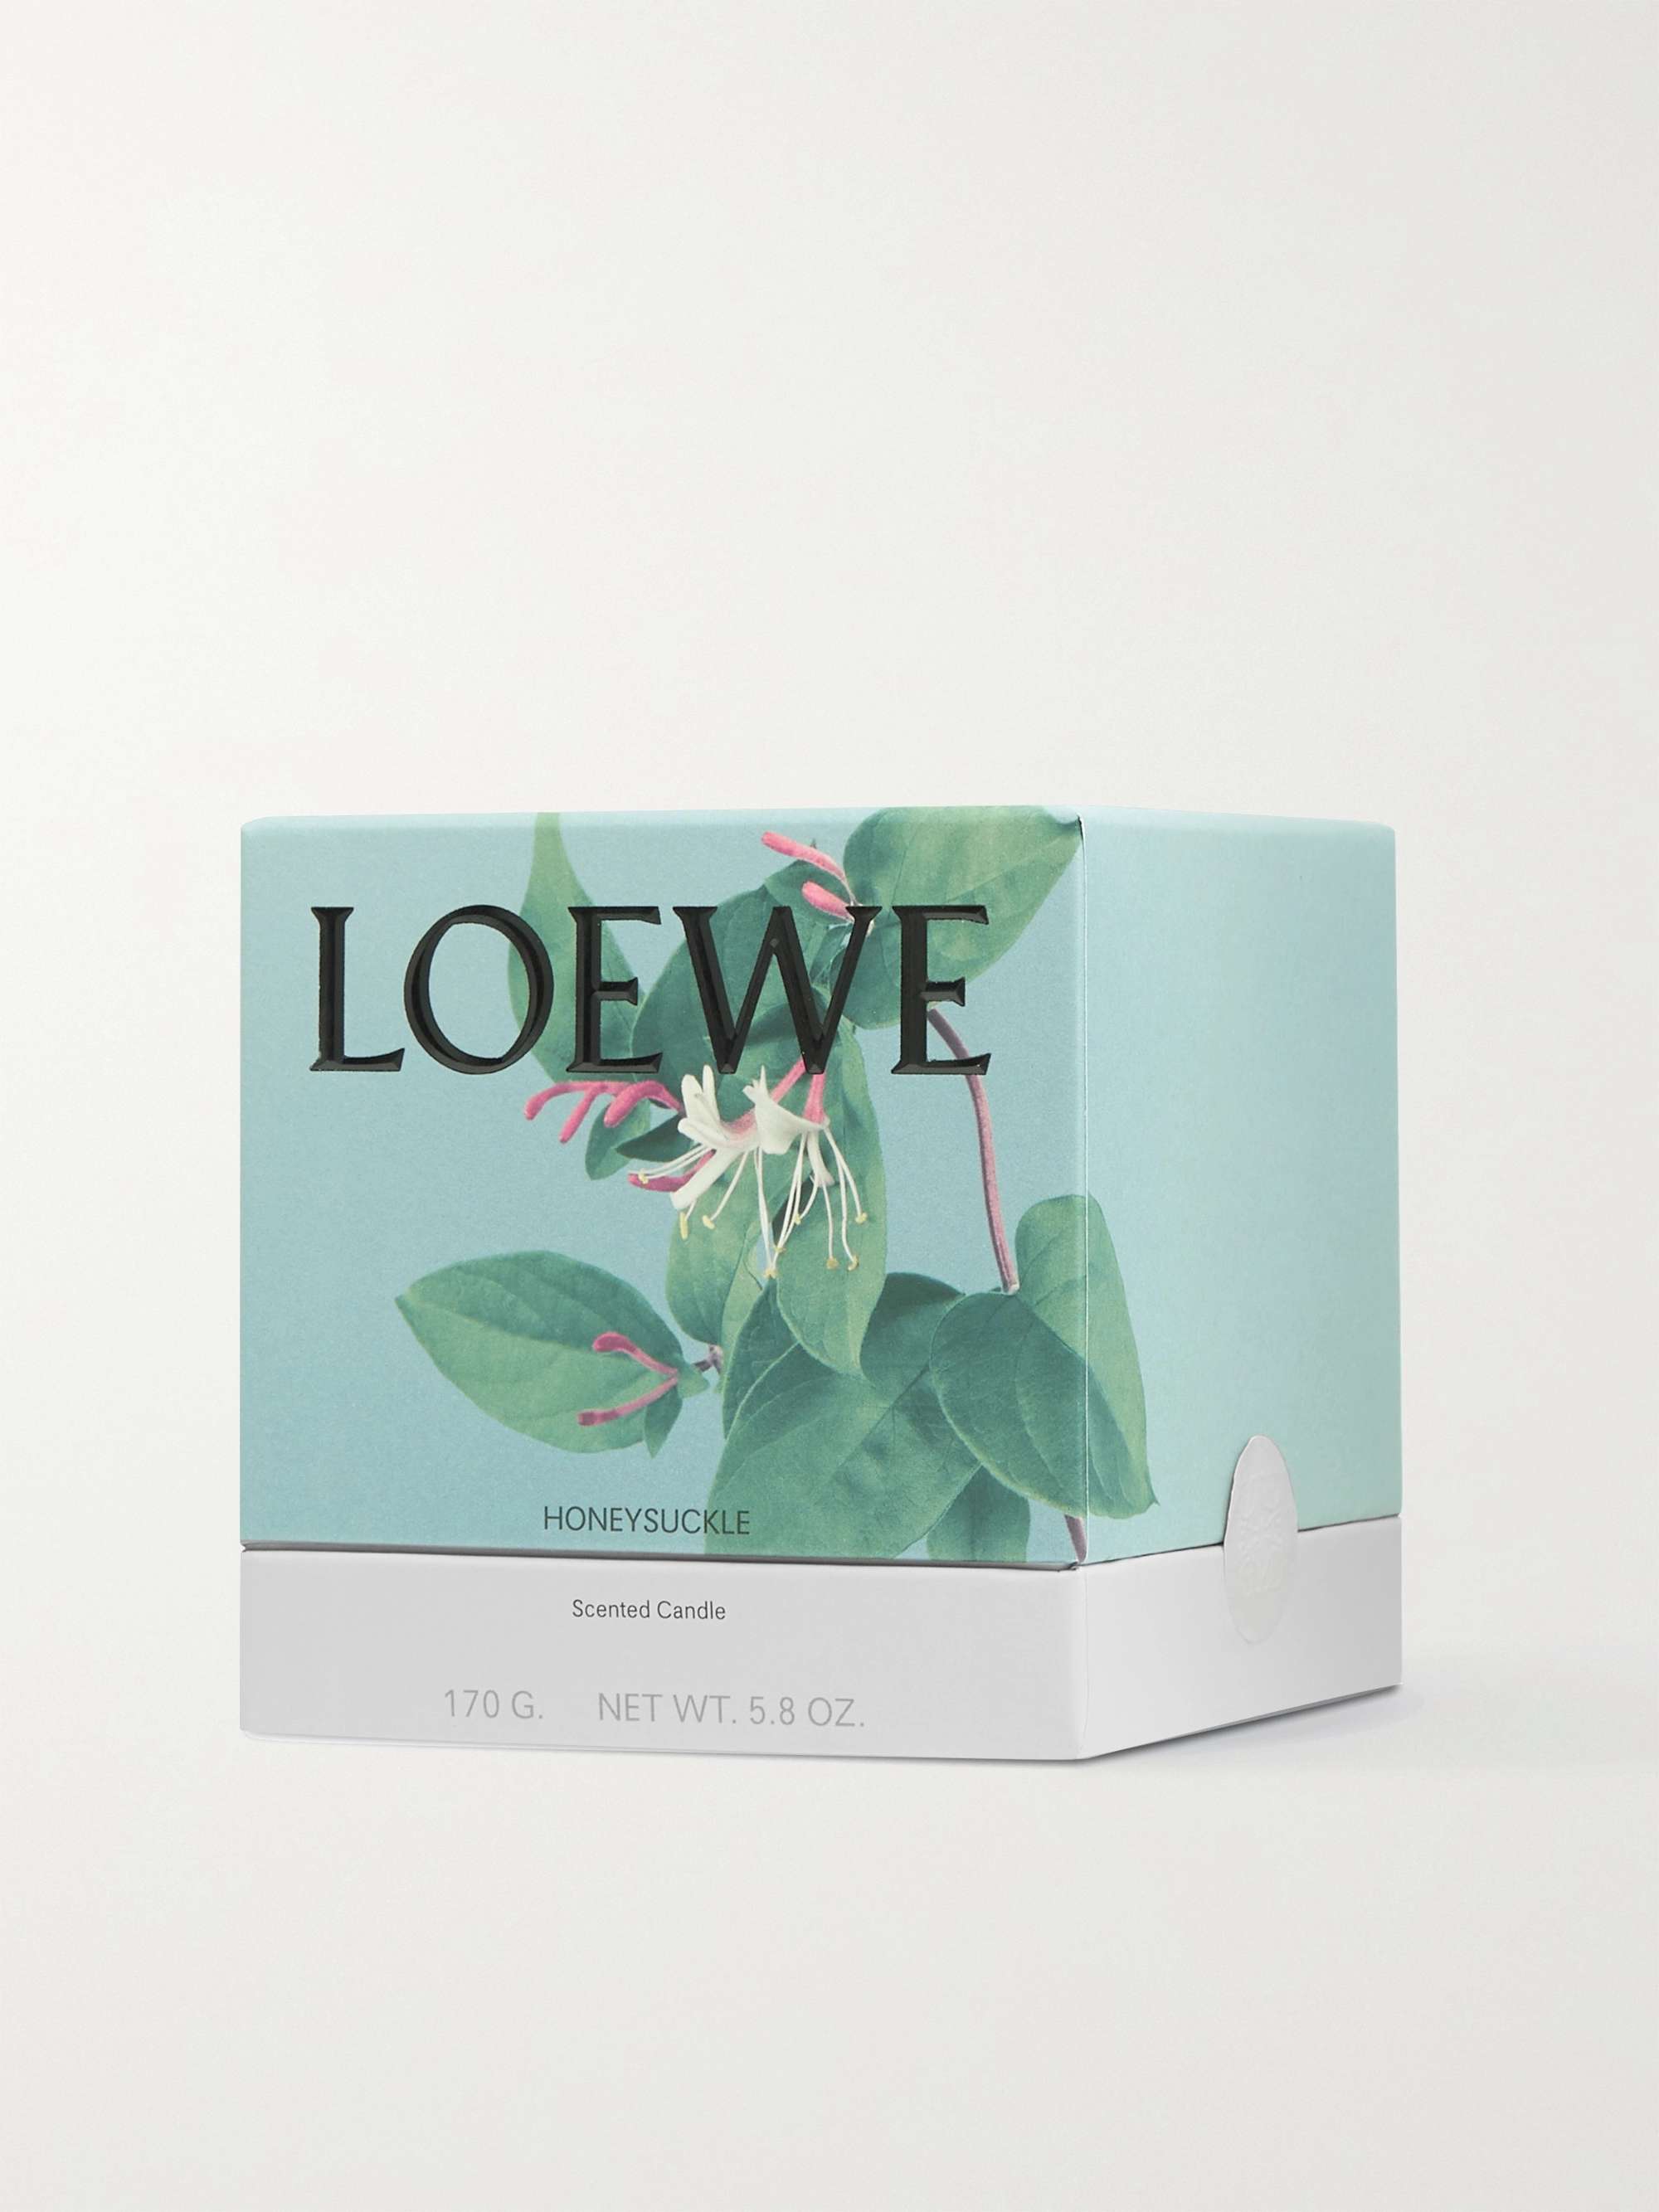 LOEWE HOME SCENTS Honeysuckle Scented Candle, 170g